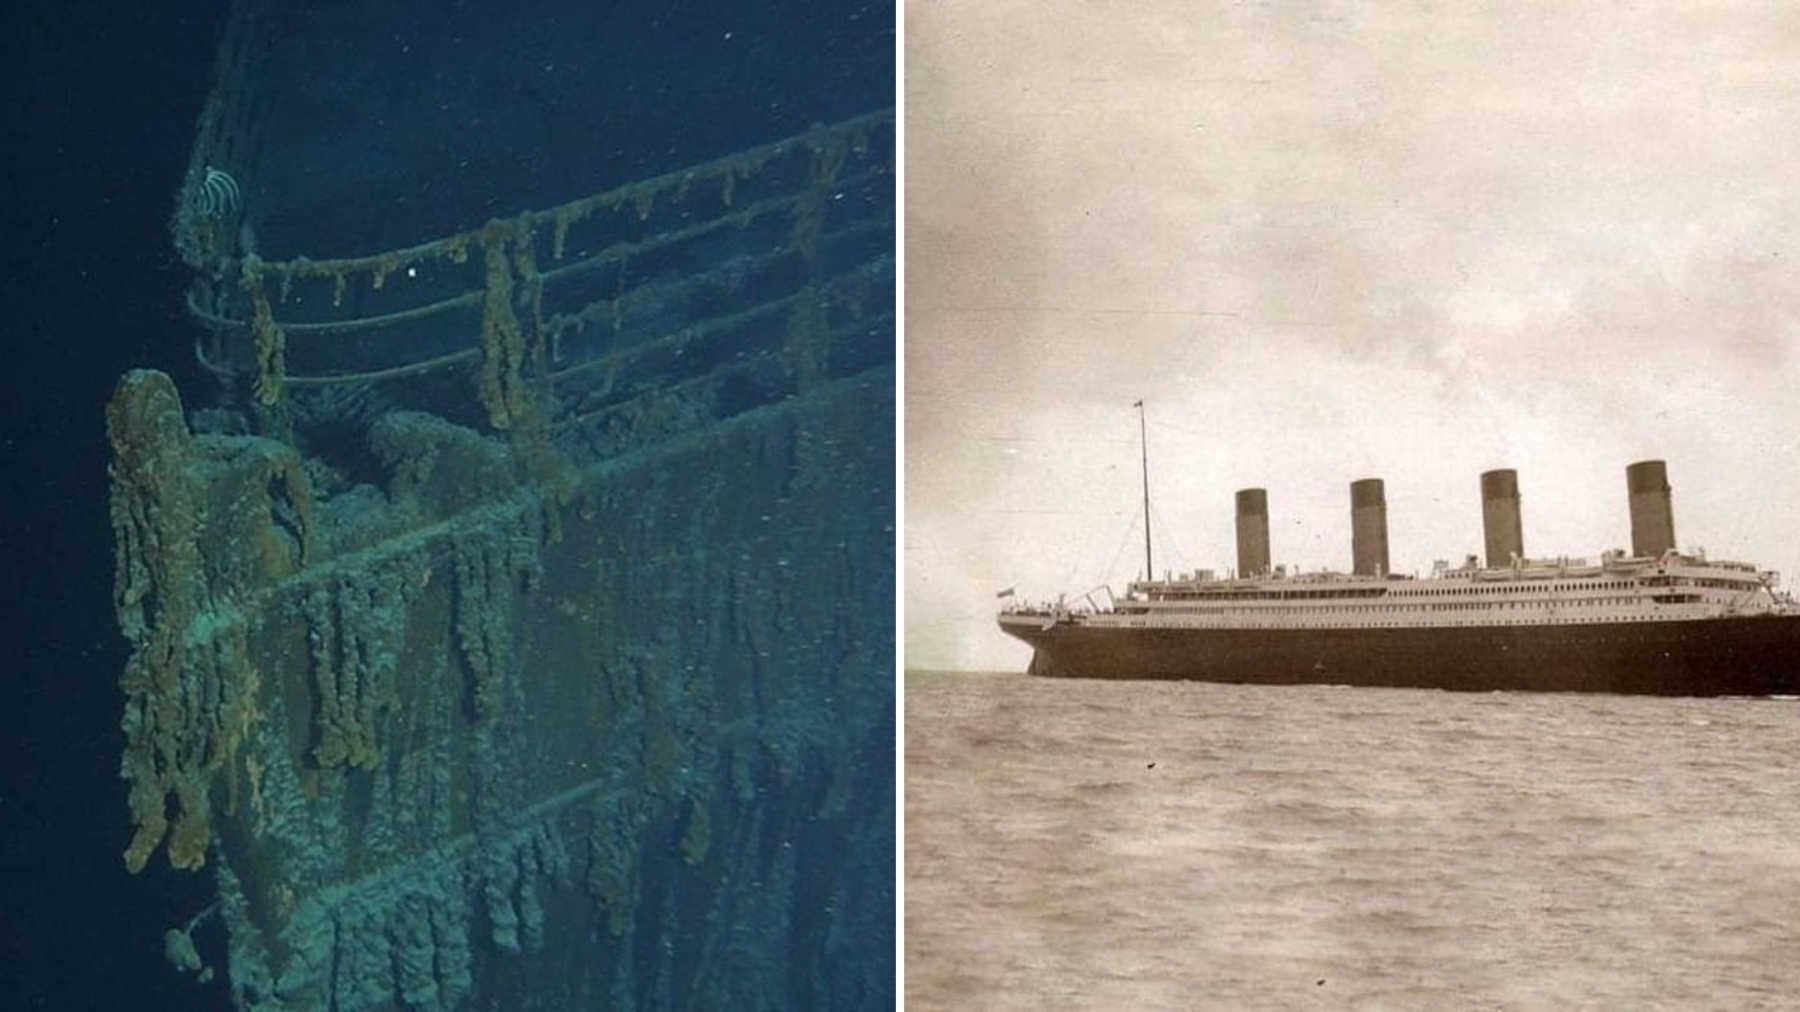 Photos Of Titanic Wreckage Show The Beginning Of Ongoing Complete ...